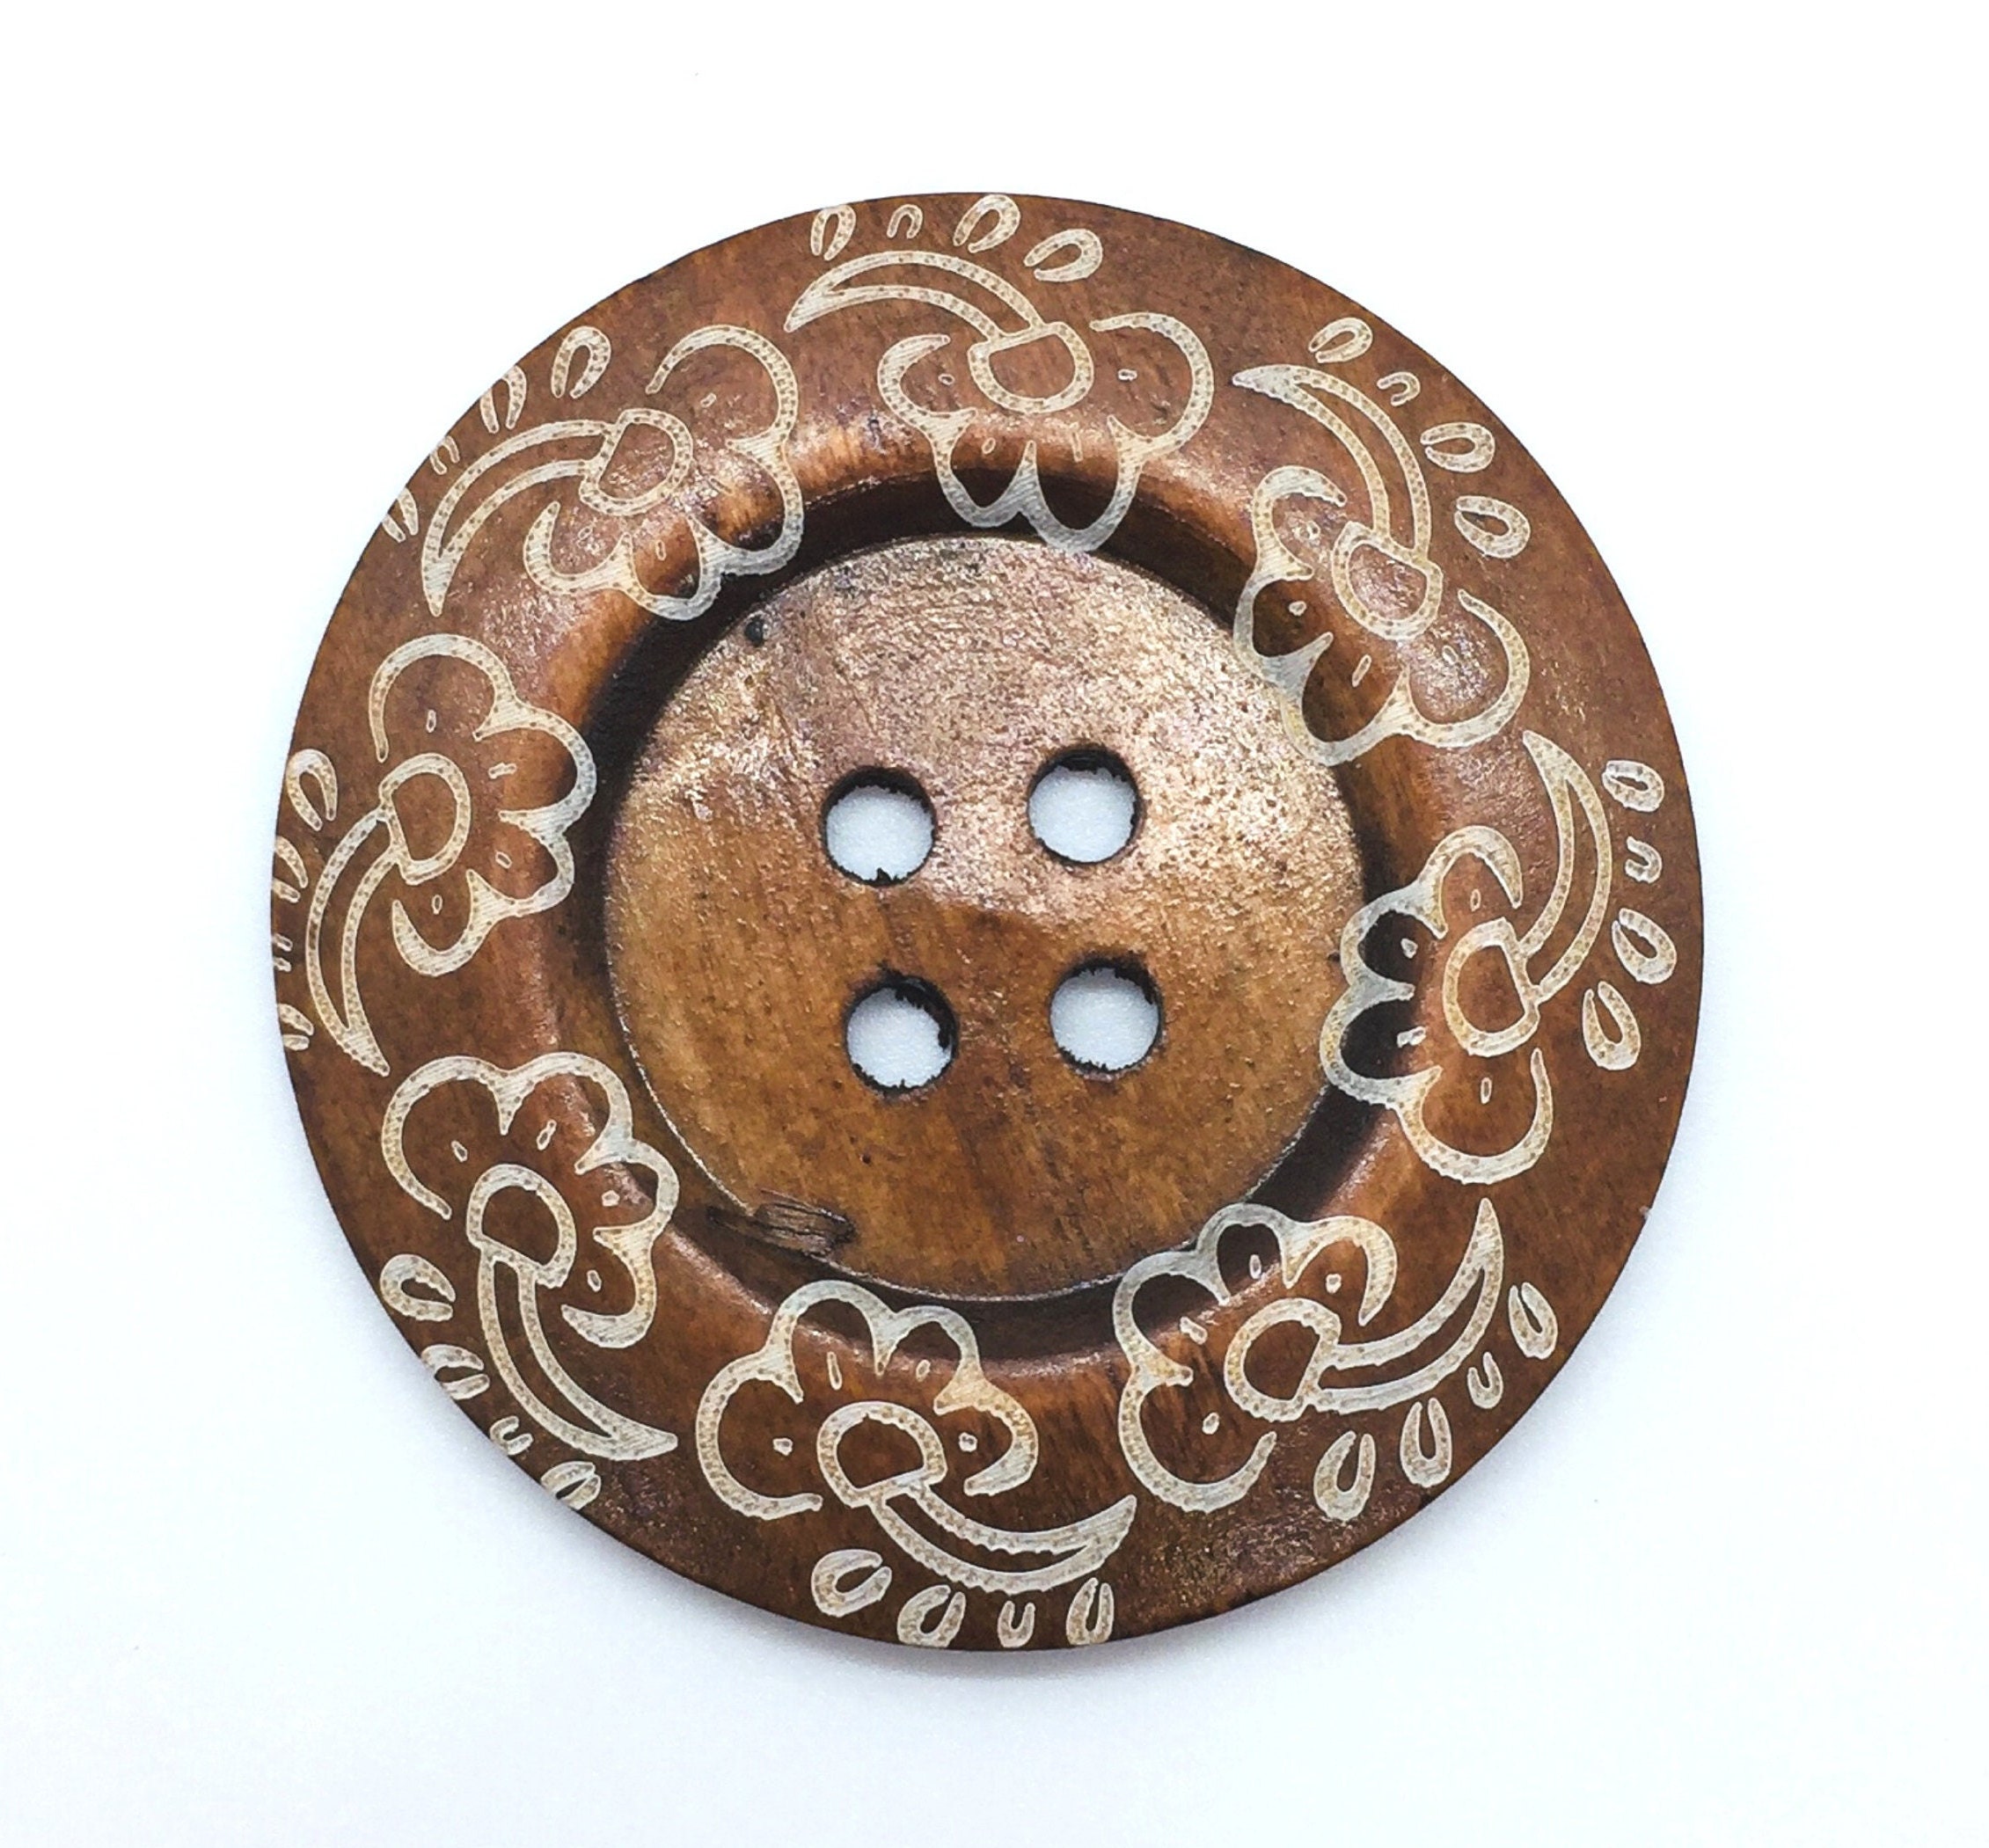 30pcs Large Size Wood Buttons 38mm Round Sewing Button 4 Holes Large Buttons for Crafts Sewing Large Wooden Buttons for DIY Clothing Bag Decoration